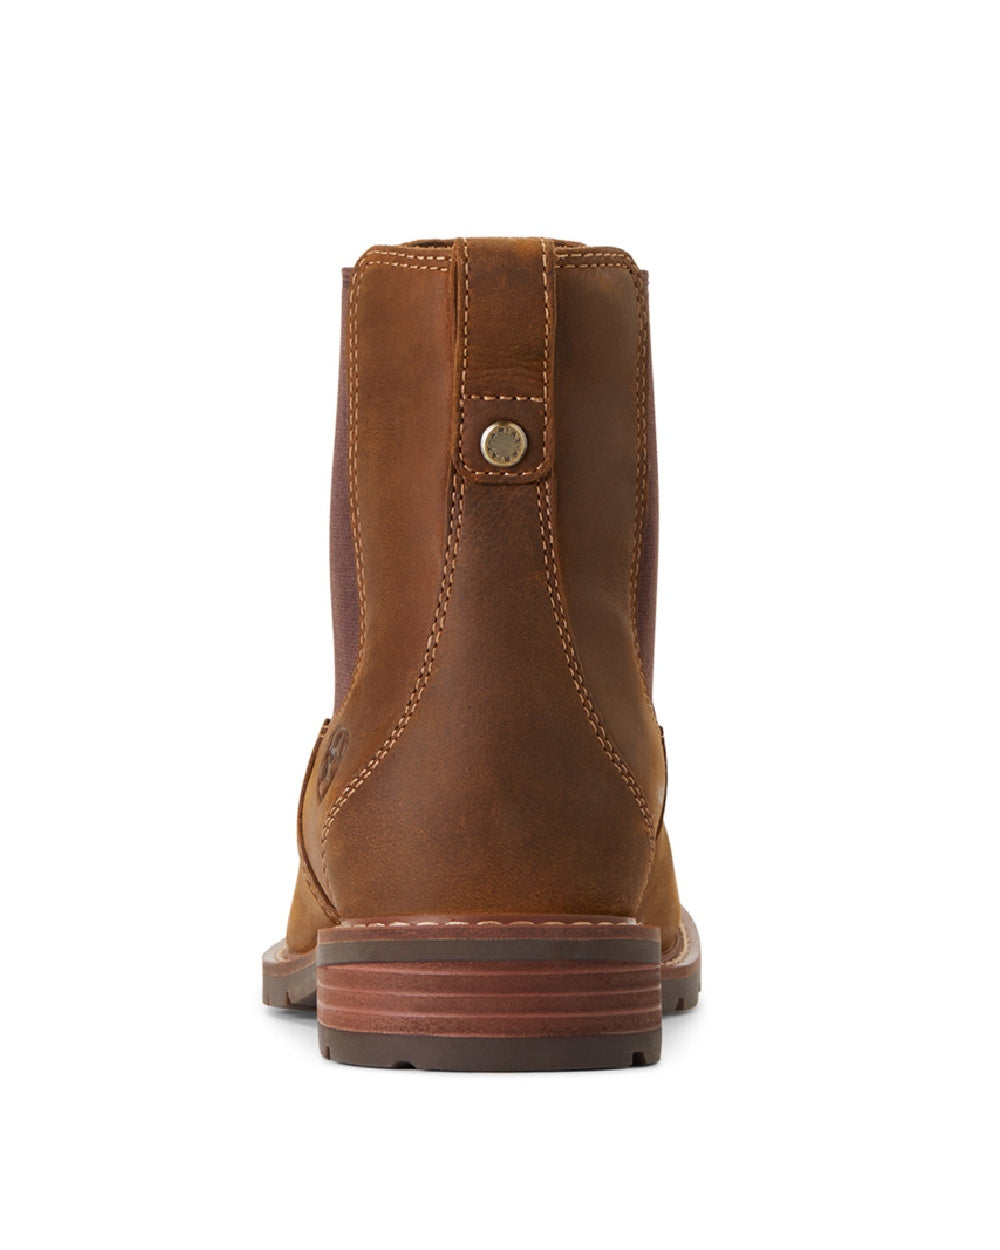 Ariat Womens Wexford Waterproof Boots in Weathered Brown 